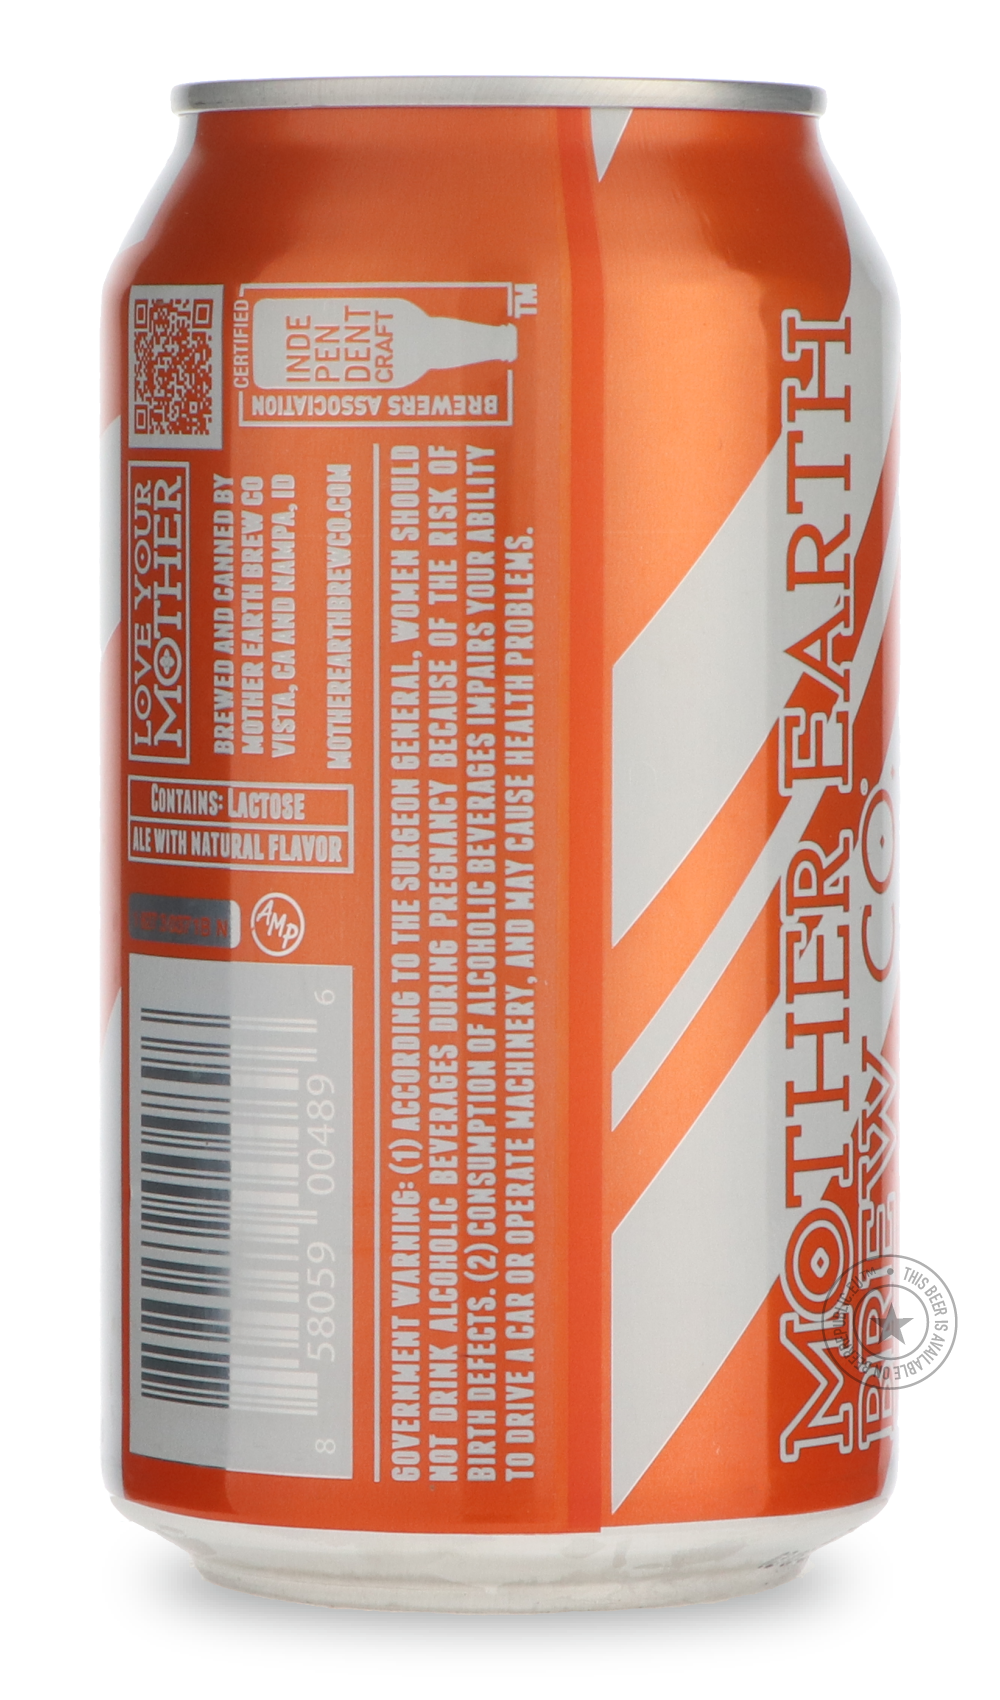 -Mother Earth- Cali Creamin’ (Peaches & Cream)-Pale- Only @ Beer Republic - The best online beer store for American & Canadian craft beer - Buy beer online from the USA and Canada - Bier online kopen - Amerikaans bier kopen - Craft beer store - Craft beer kopen - Amerikanisch bier kaufen - Bier online kaufen - Acheter biere online - IPA - Stout - Porter - New England IPA - Hazy IPA - Imperial Stout - Barrel Aged - Barrel Aged Imperial Stout - Brown - Dark beer - Blond - Blonde - Pilsner - Lager - Wheat - We